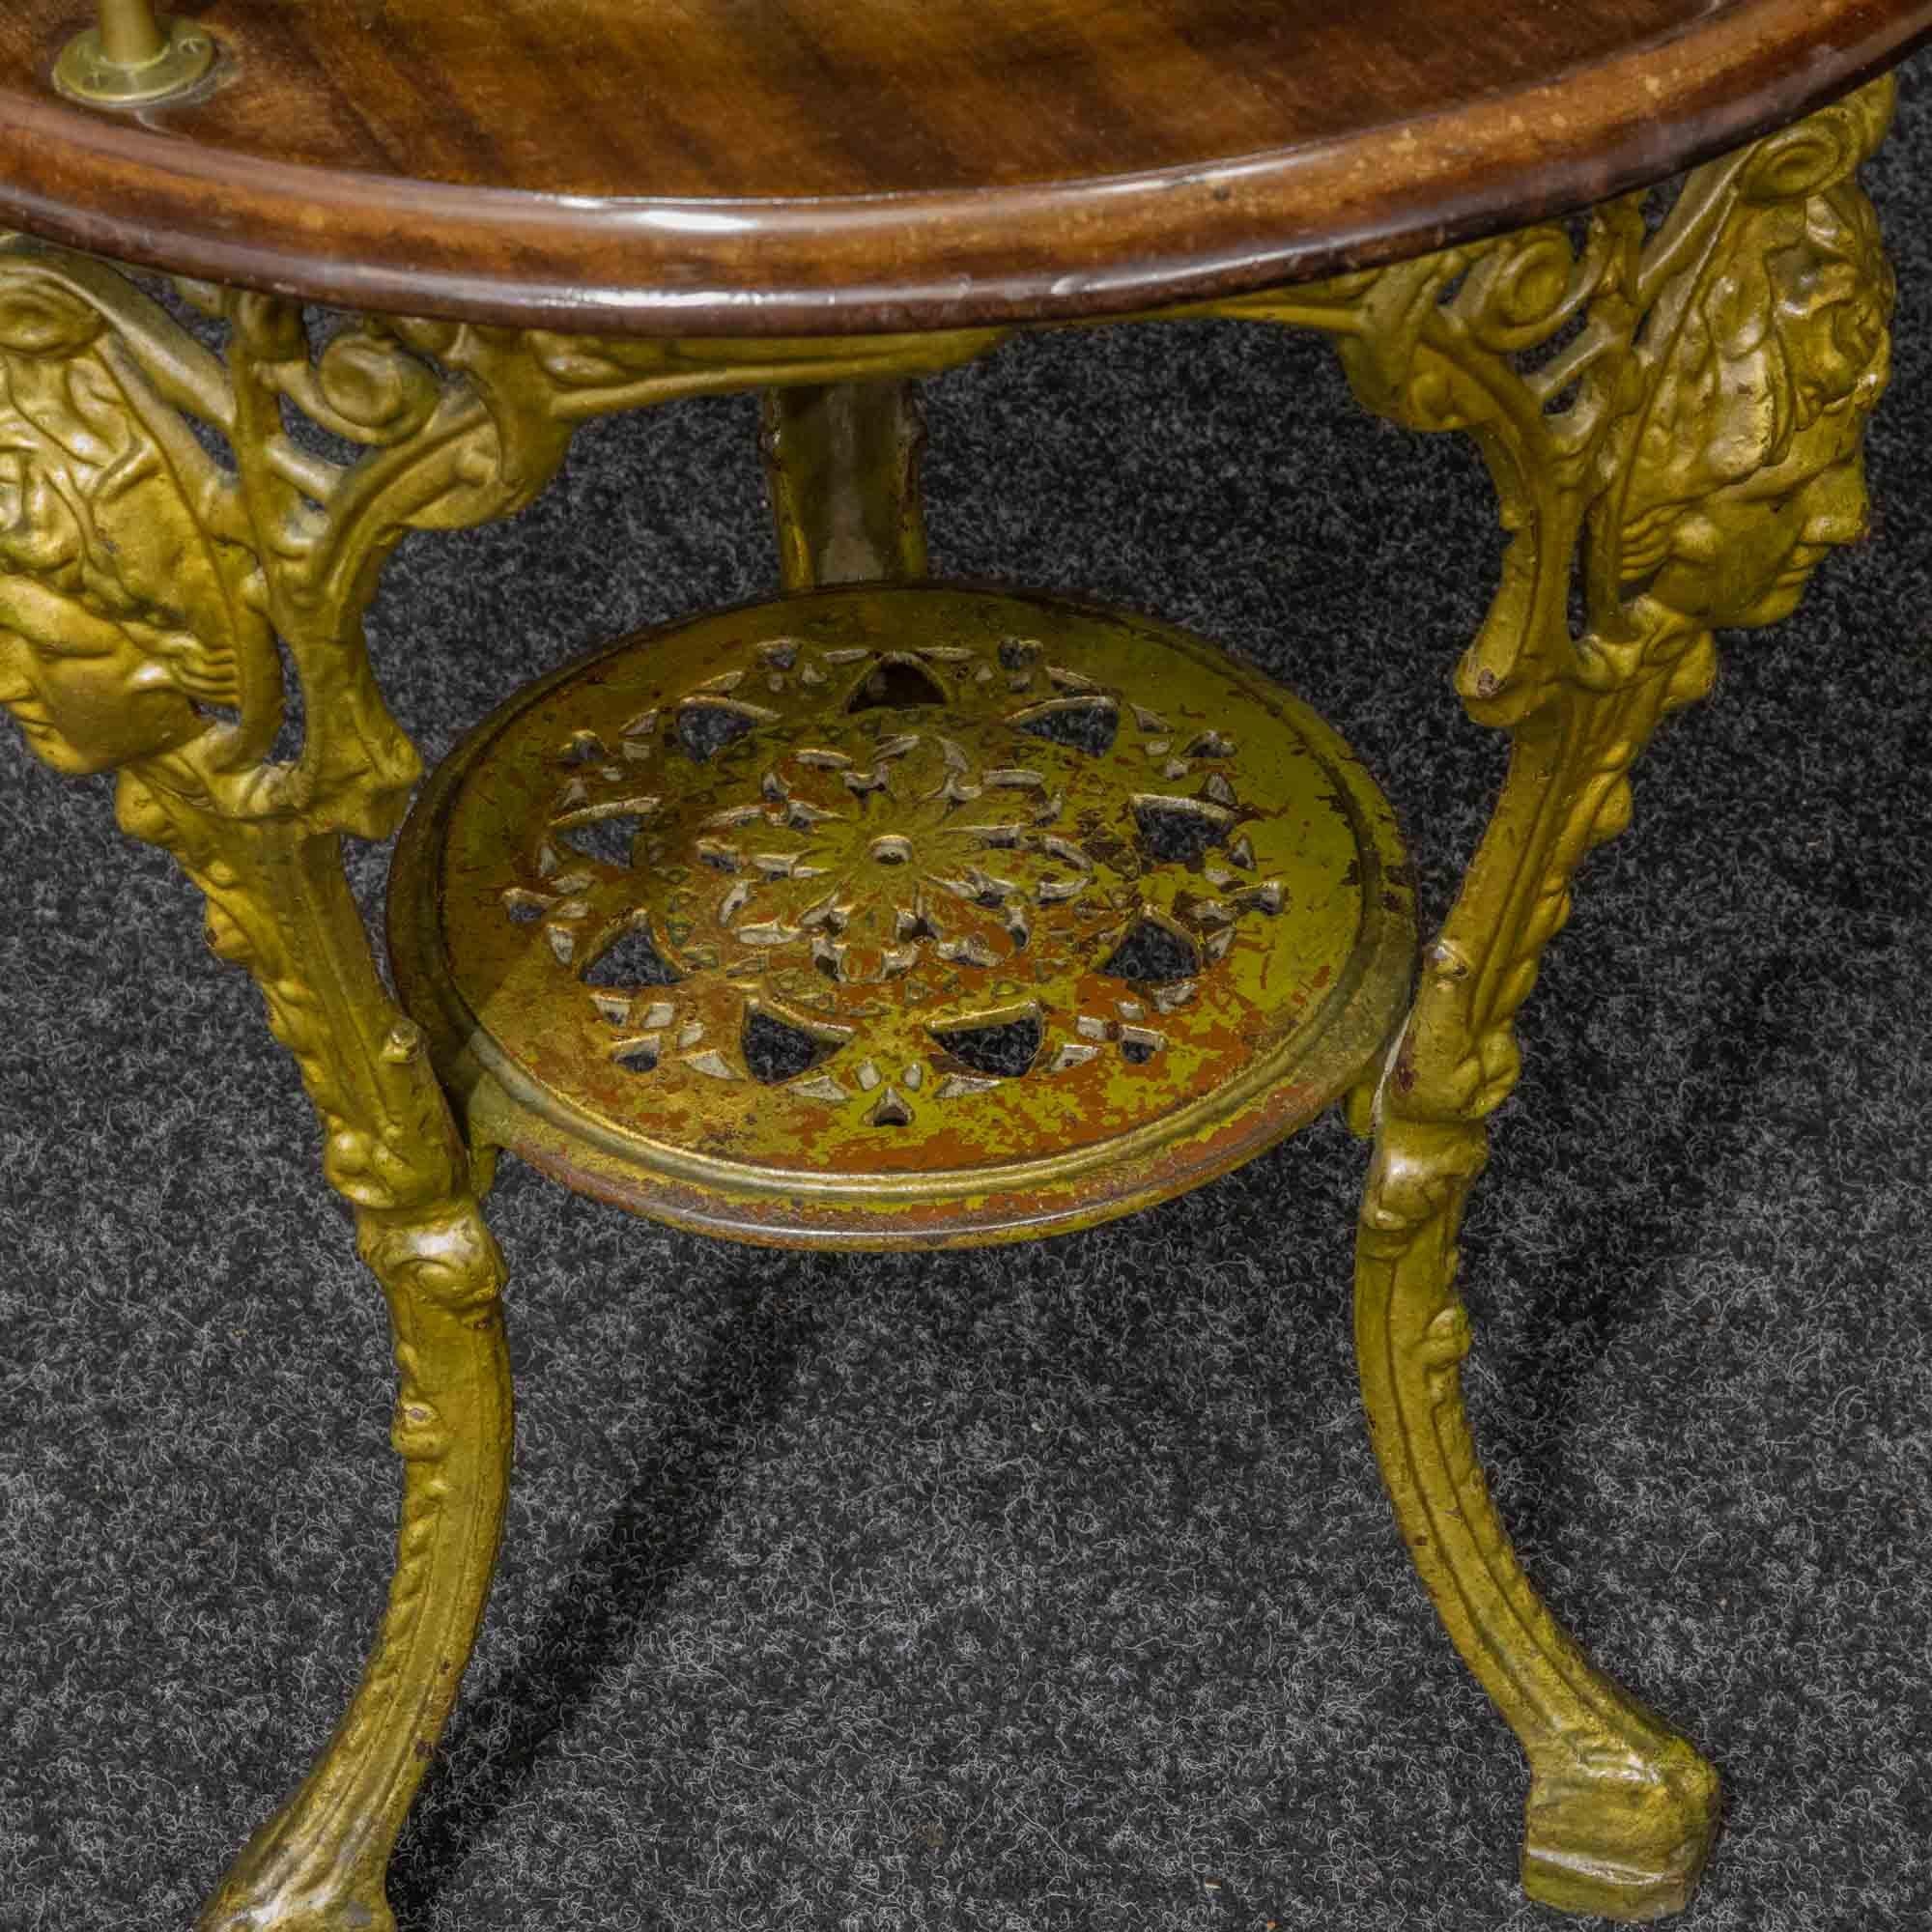 And a rare survivor, circa 1890. To have the original figured mahogany top with a super patina and a wonderful brass 'catch' gallery. This table would normally be found in a public house, but there is no way that this table has seen any heavy amount